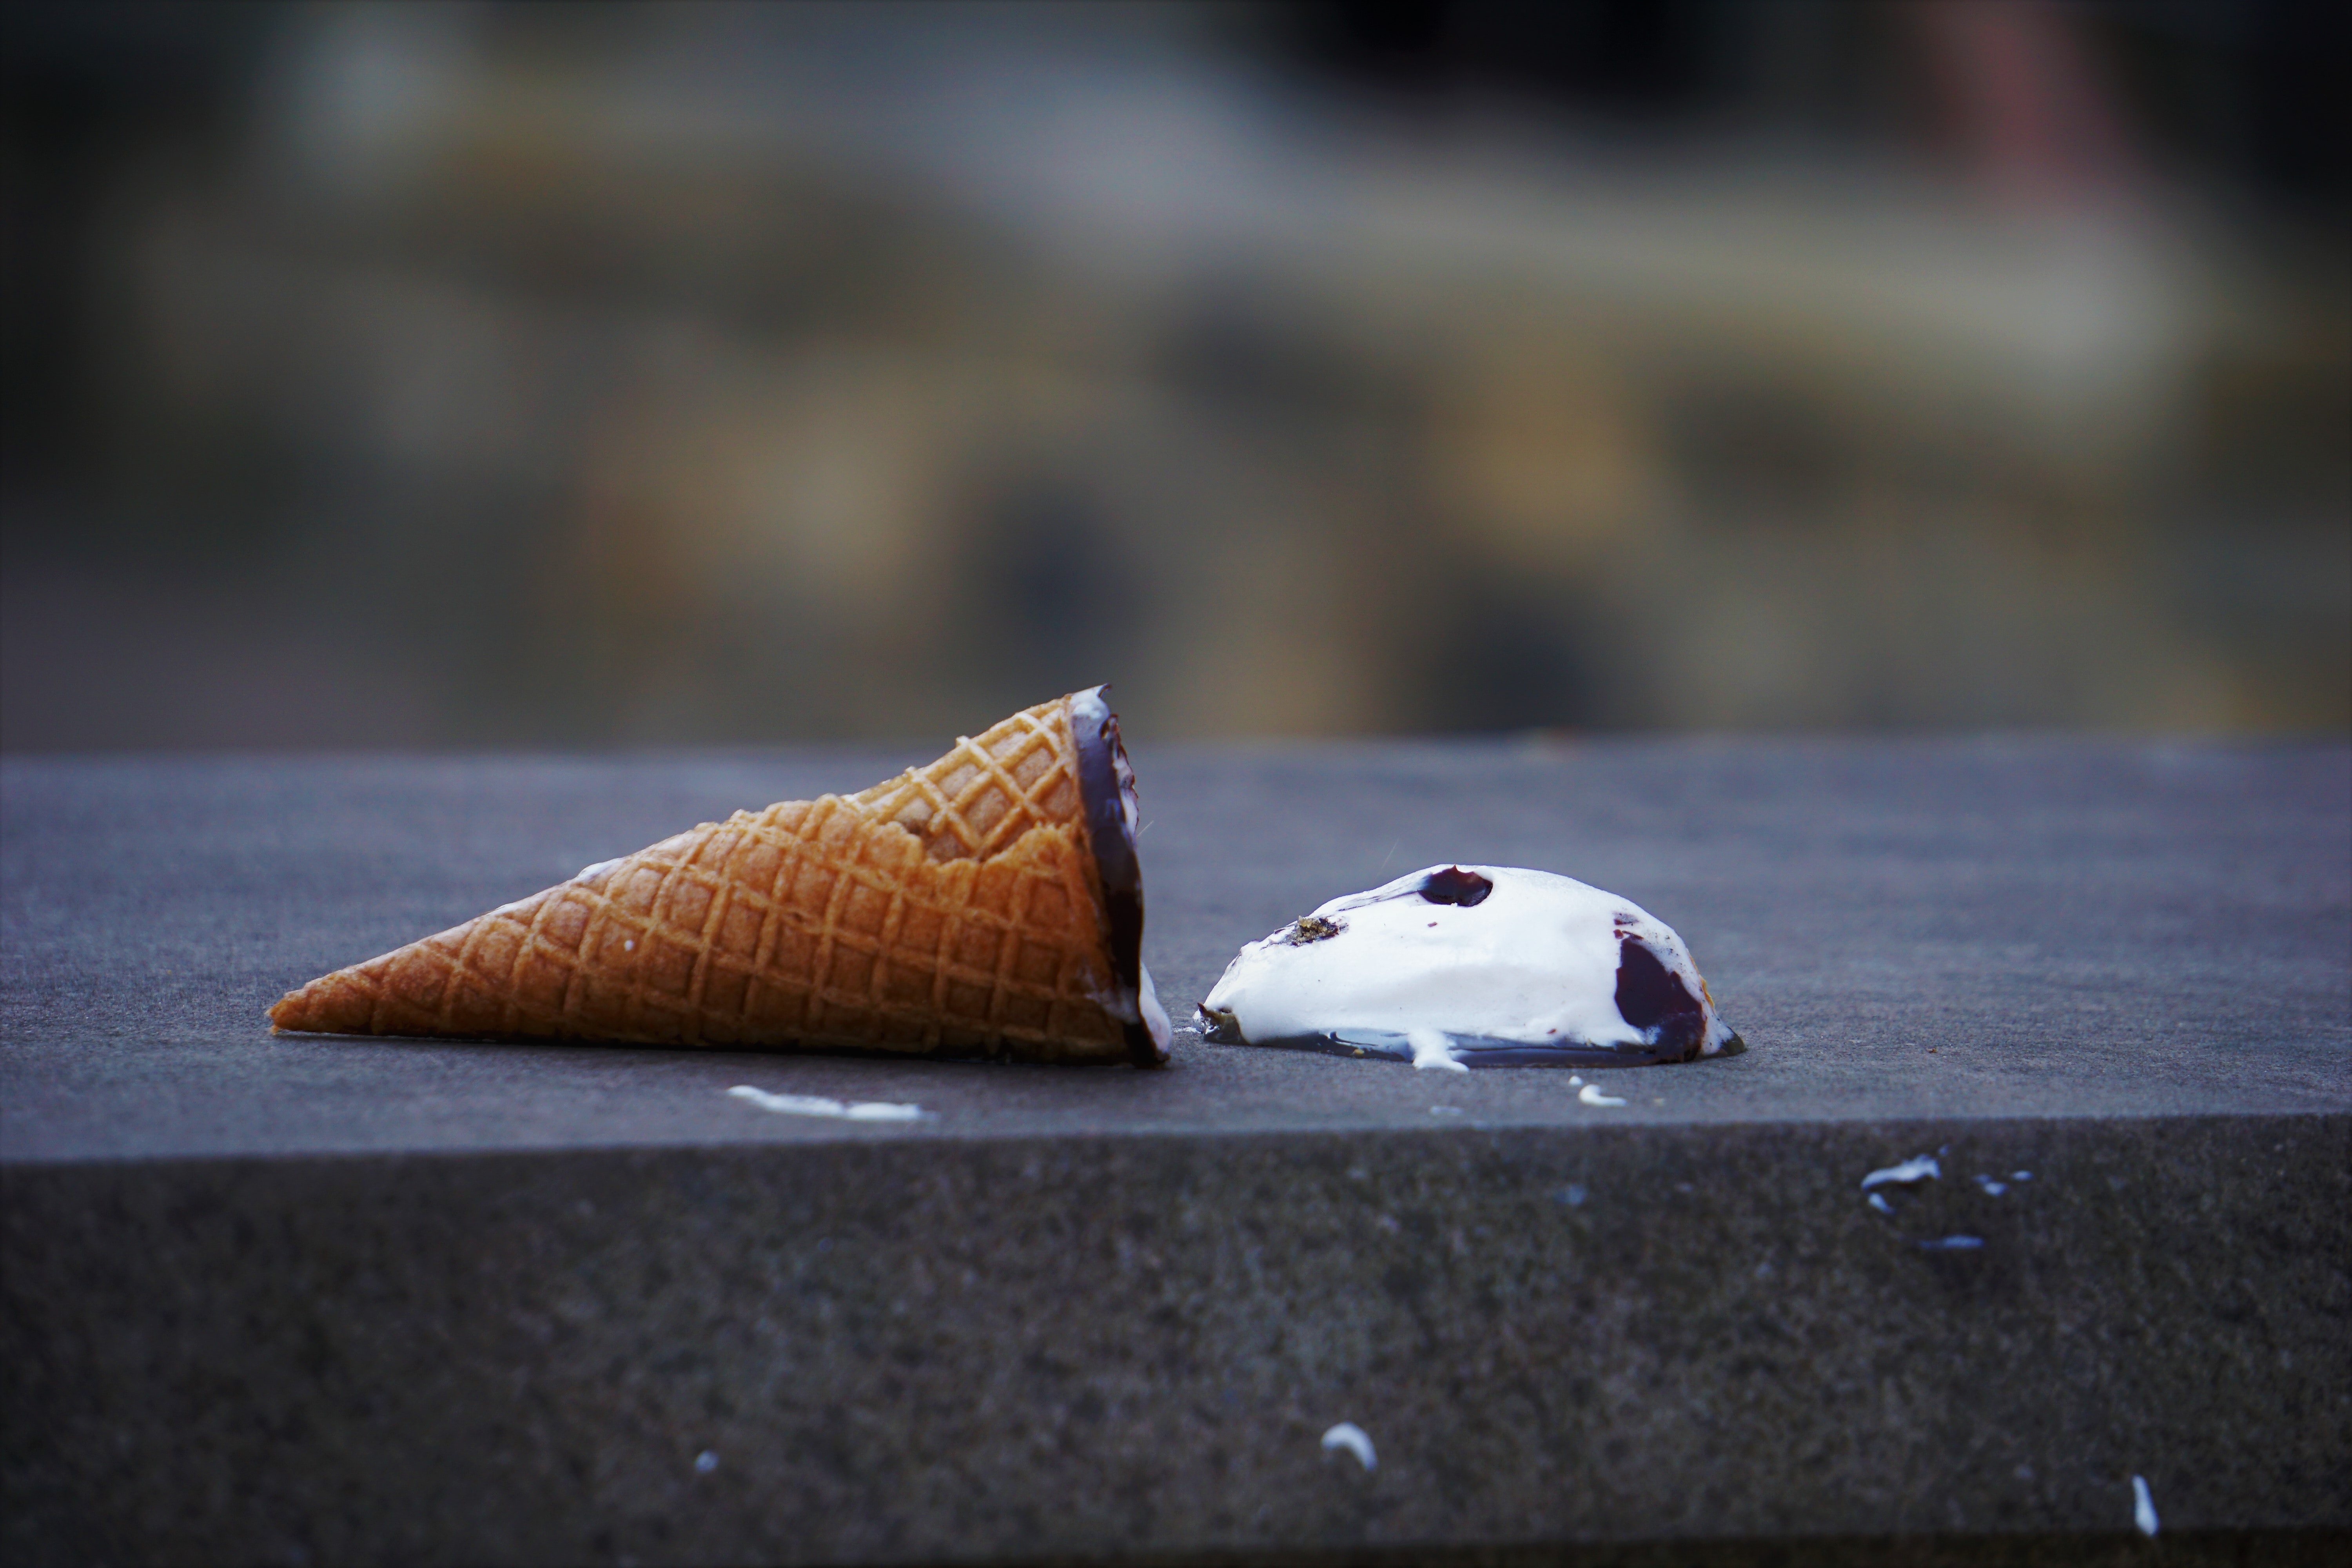 Picture of an ice cream fallen on the floor